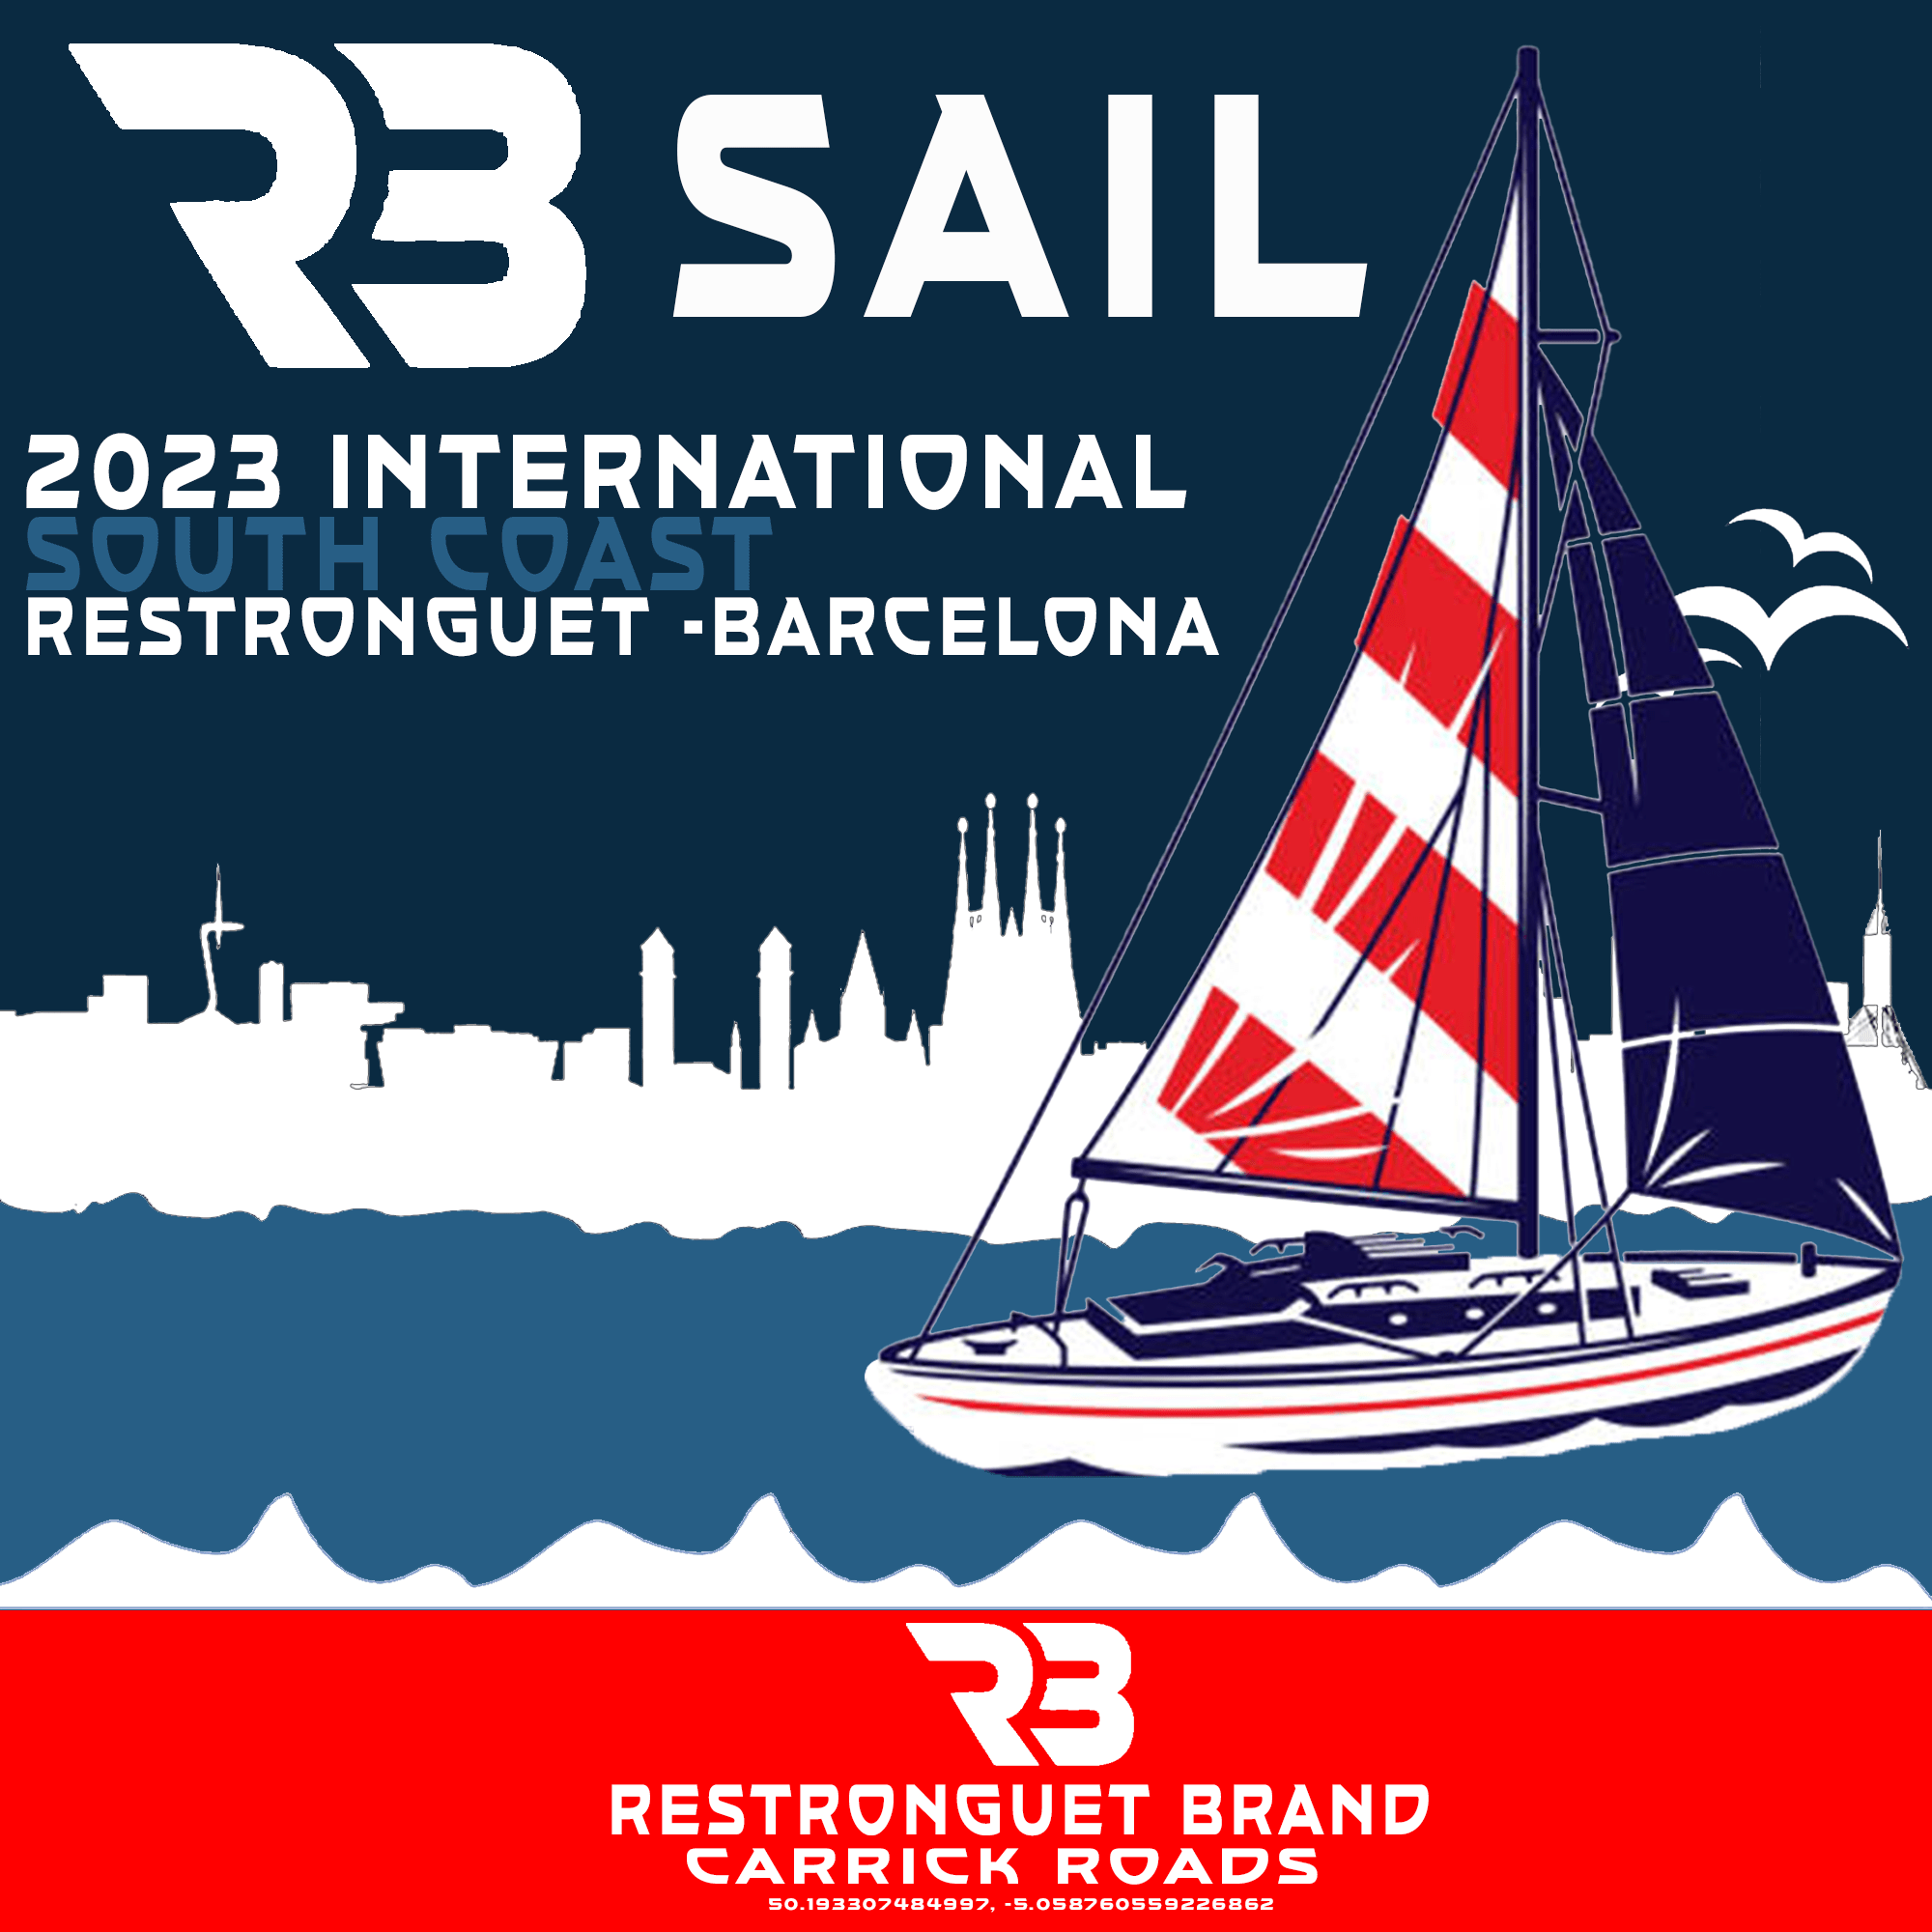 RB SAIL PICTURE